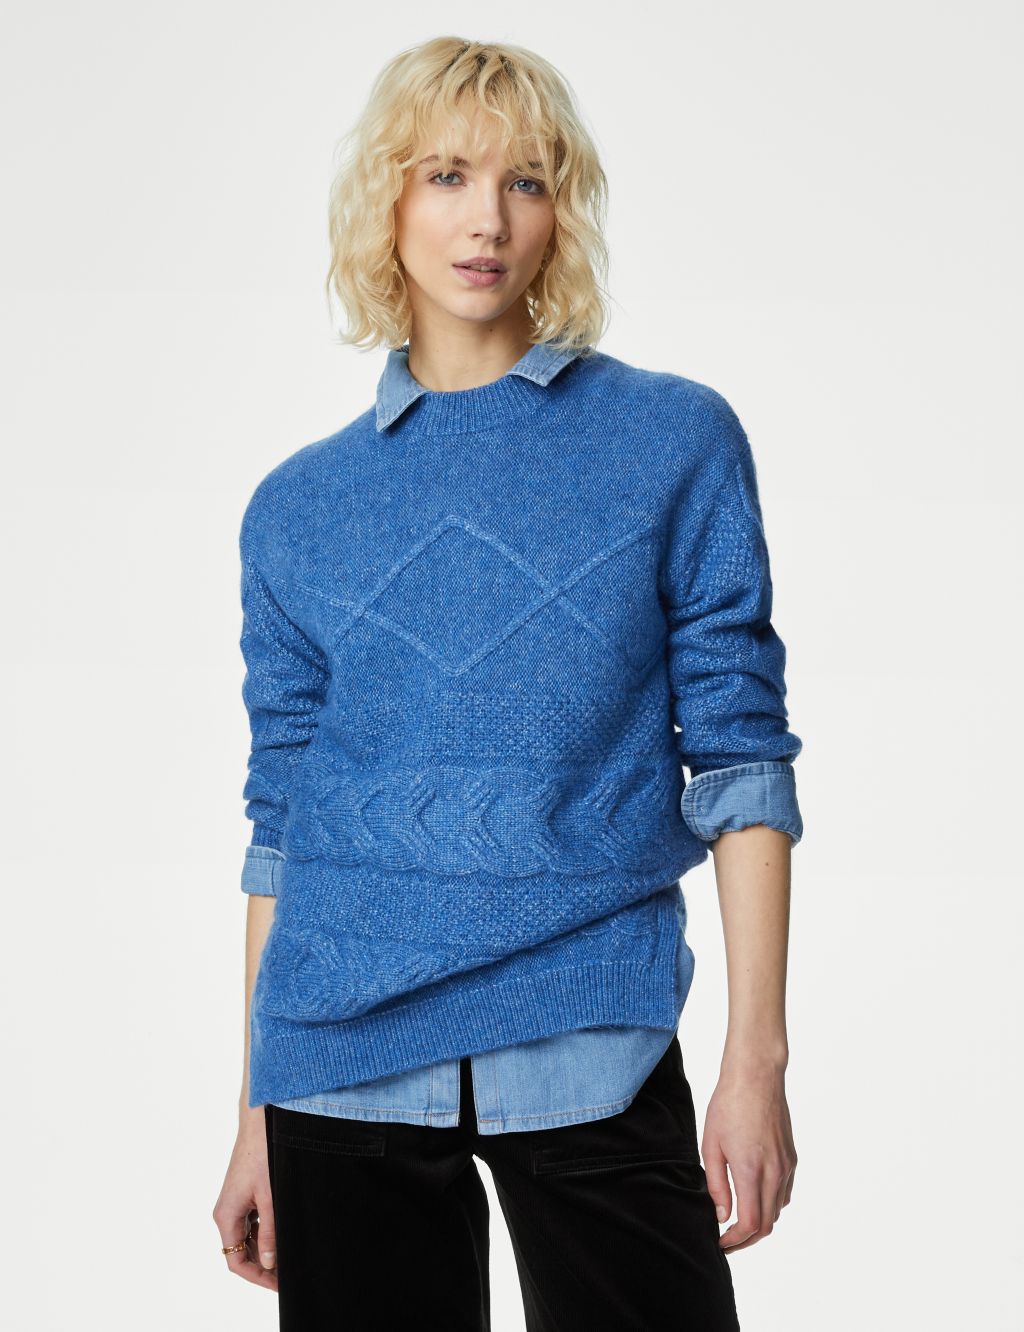 Cable Knit Round Neck Jumper with Wool image 3